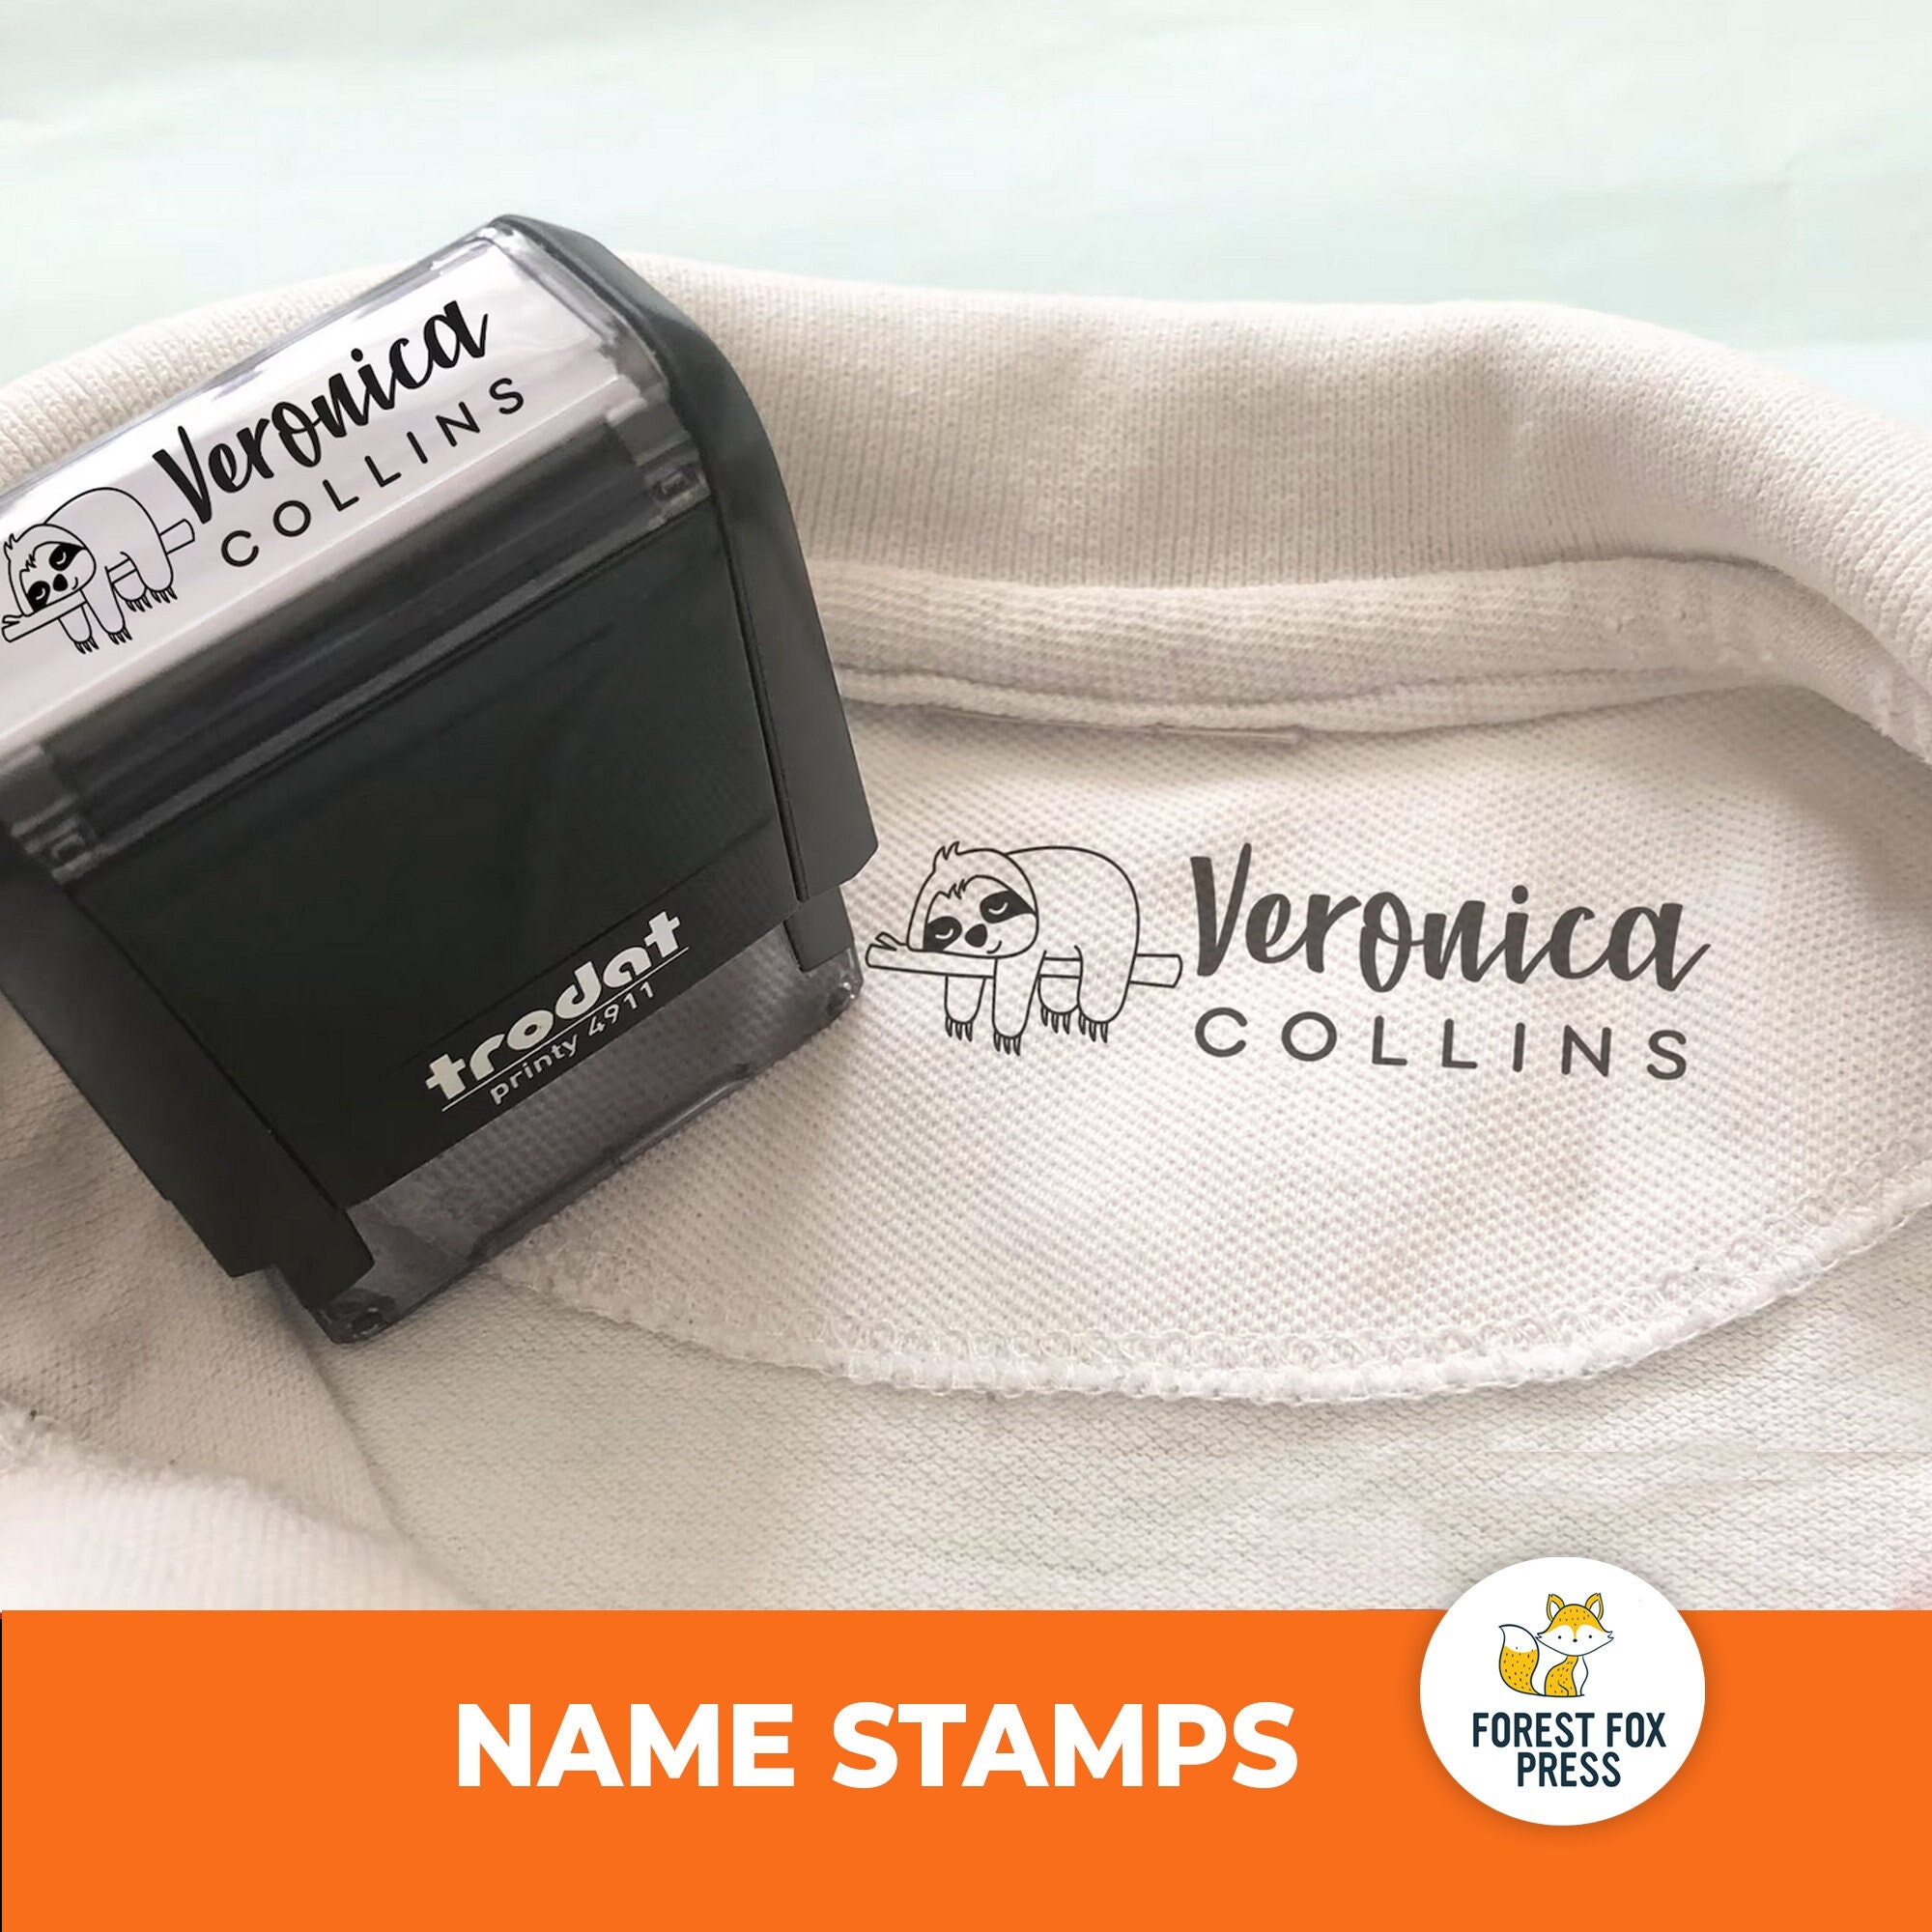 Rubber Stamp Creation Clothing Stamp - Self Inking Name Stamp Personalized  - Customizable 2 Lines Text - School Uniform, Baby Clothes, Nursing Home